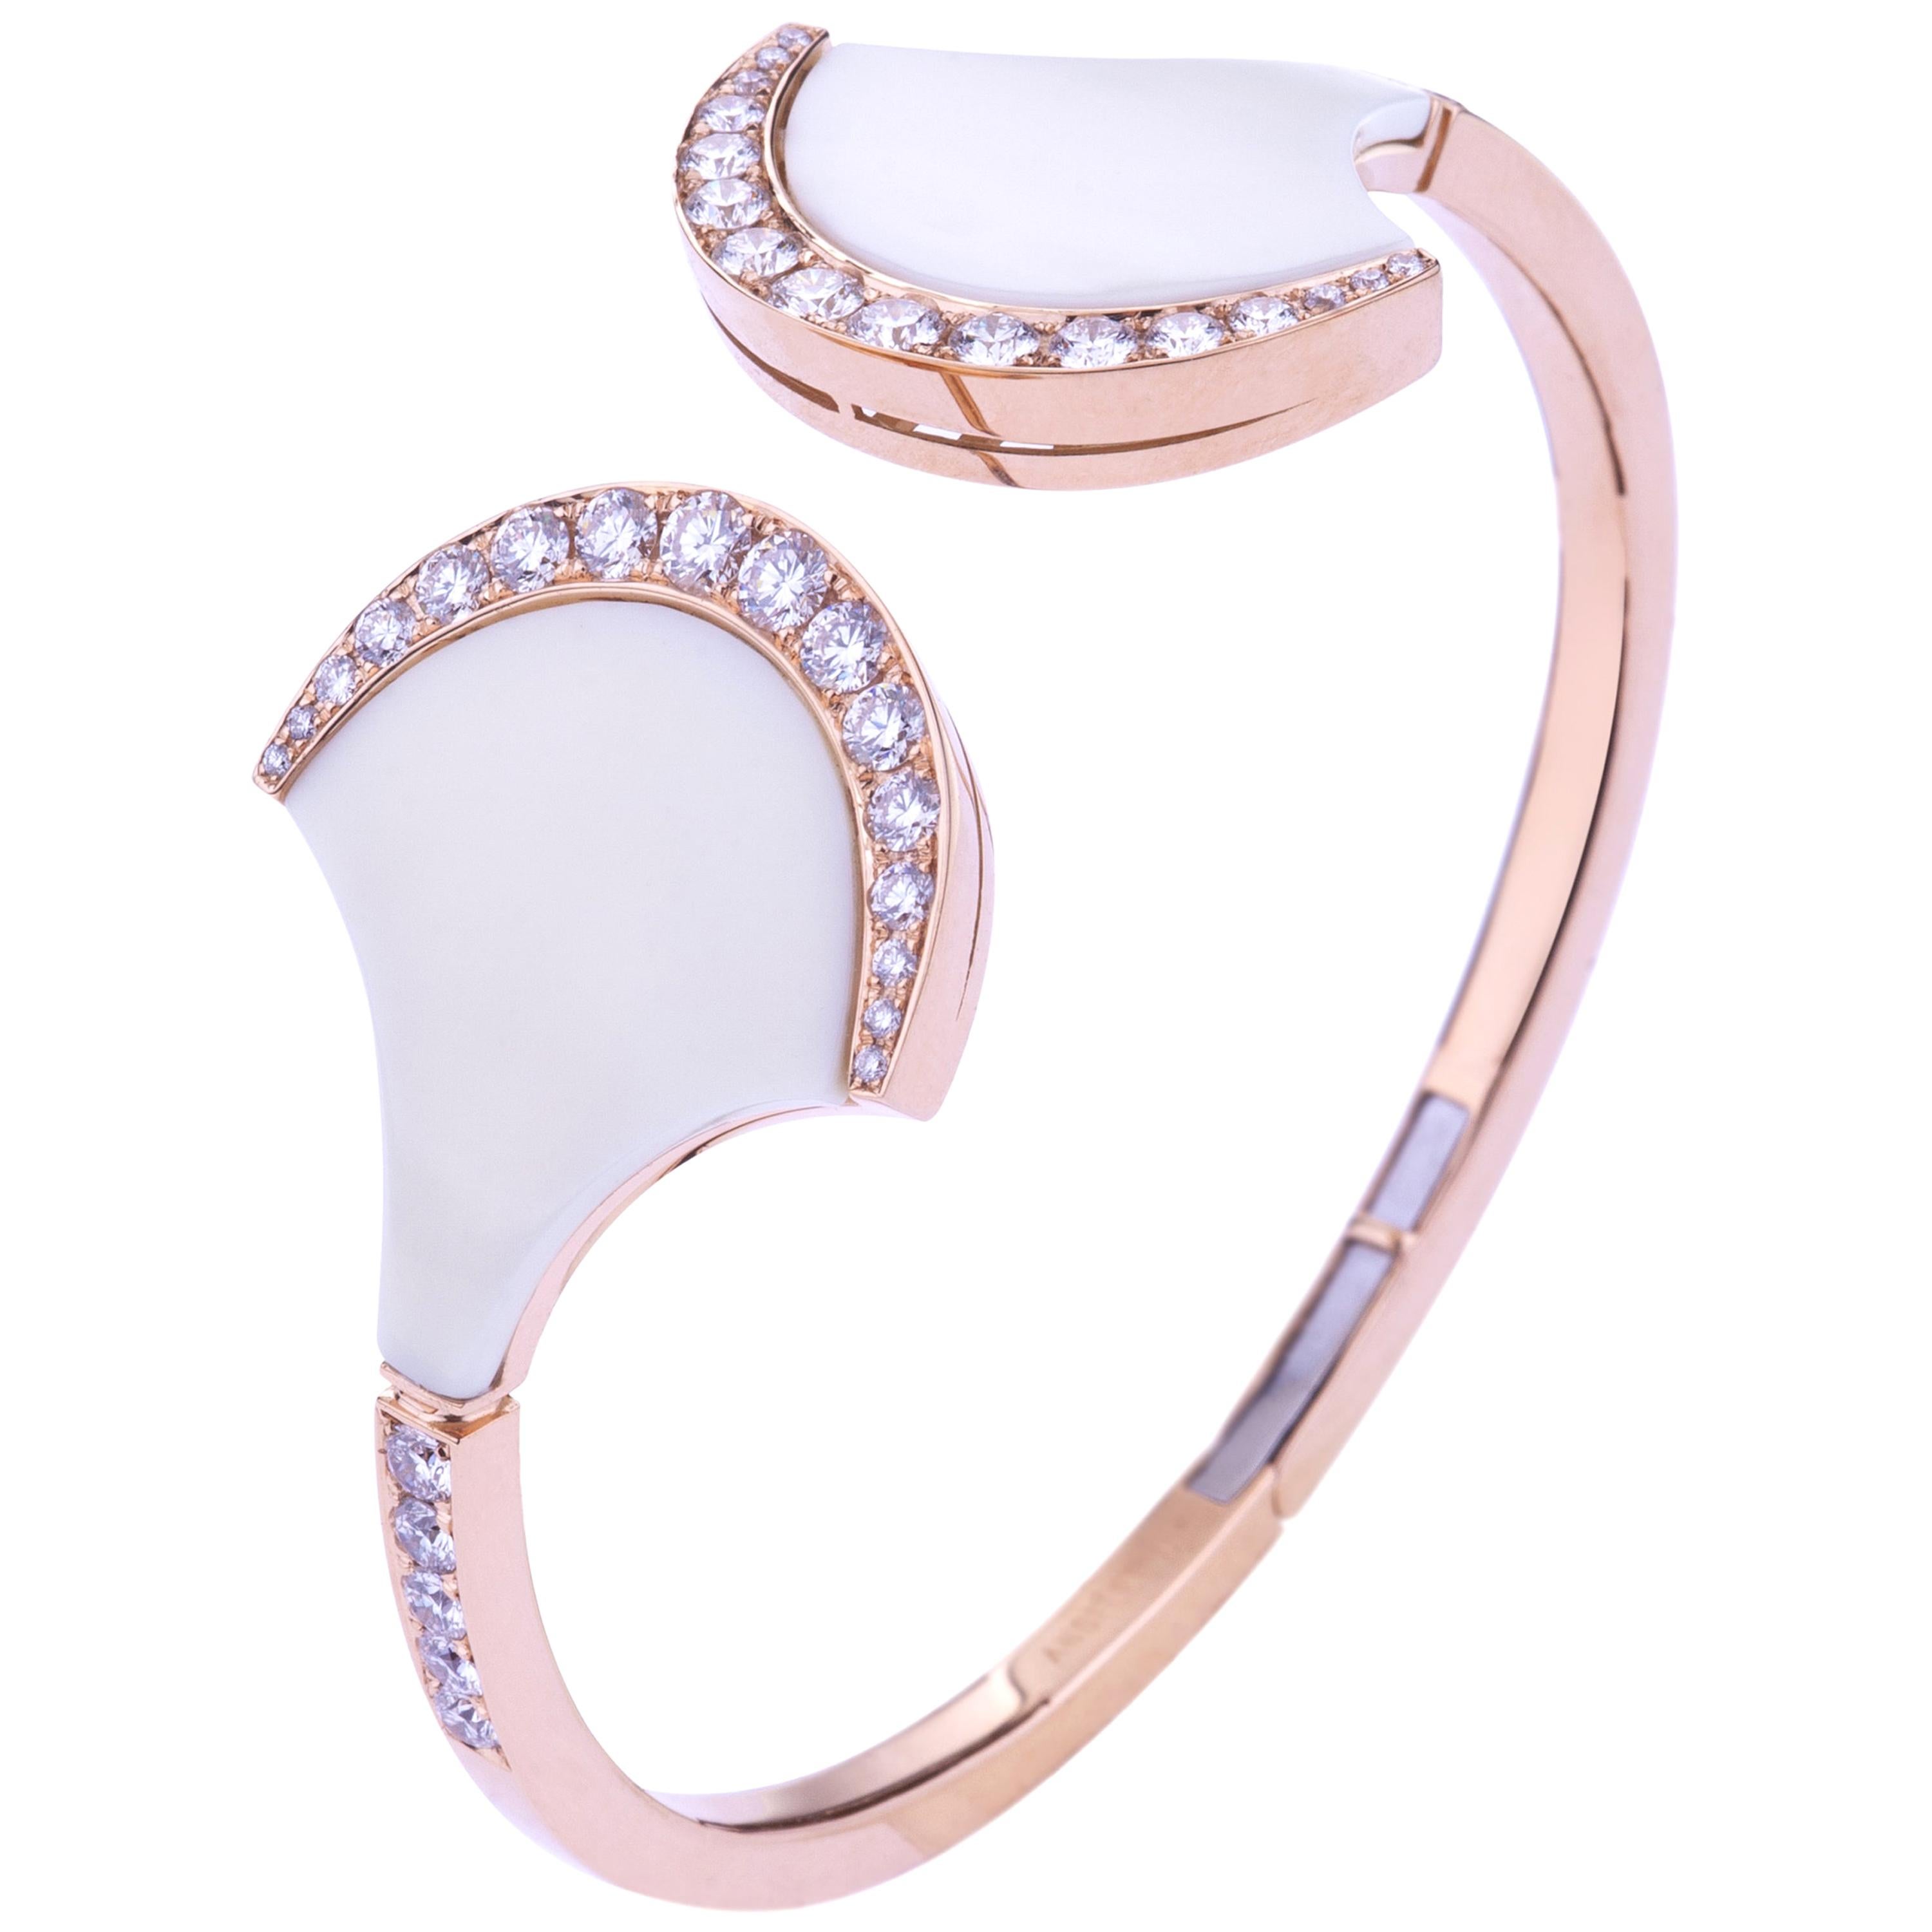 Exclusive Wave Bangle Rose Gold with White Ceramic and Diamonds